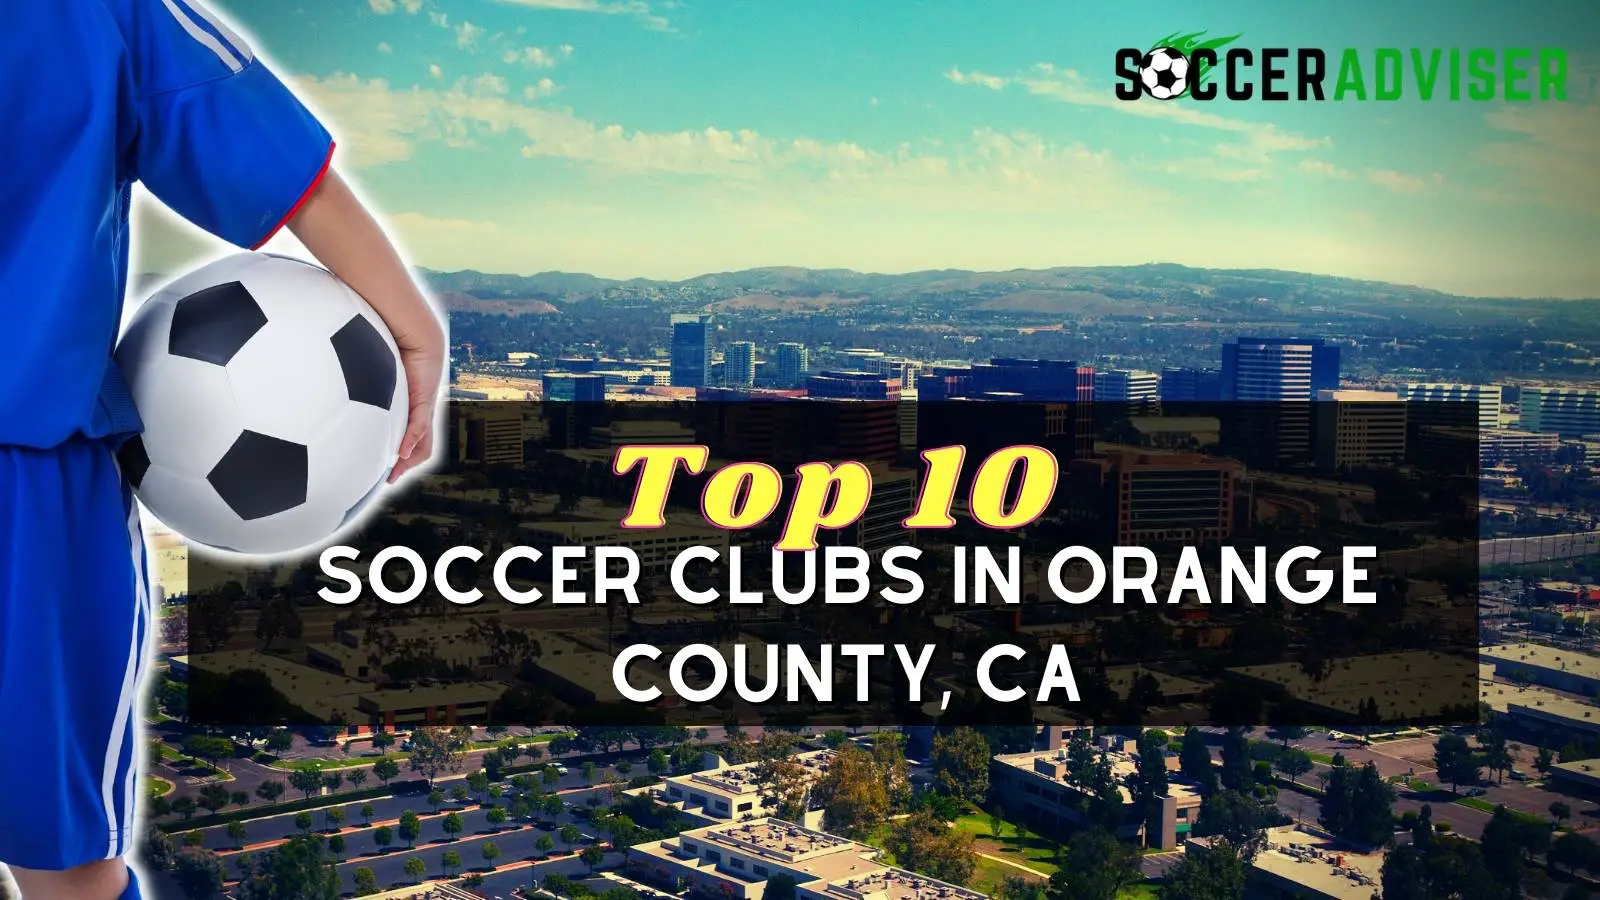 Top 10 Soccer Clubs in Orange County, CA (2022)